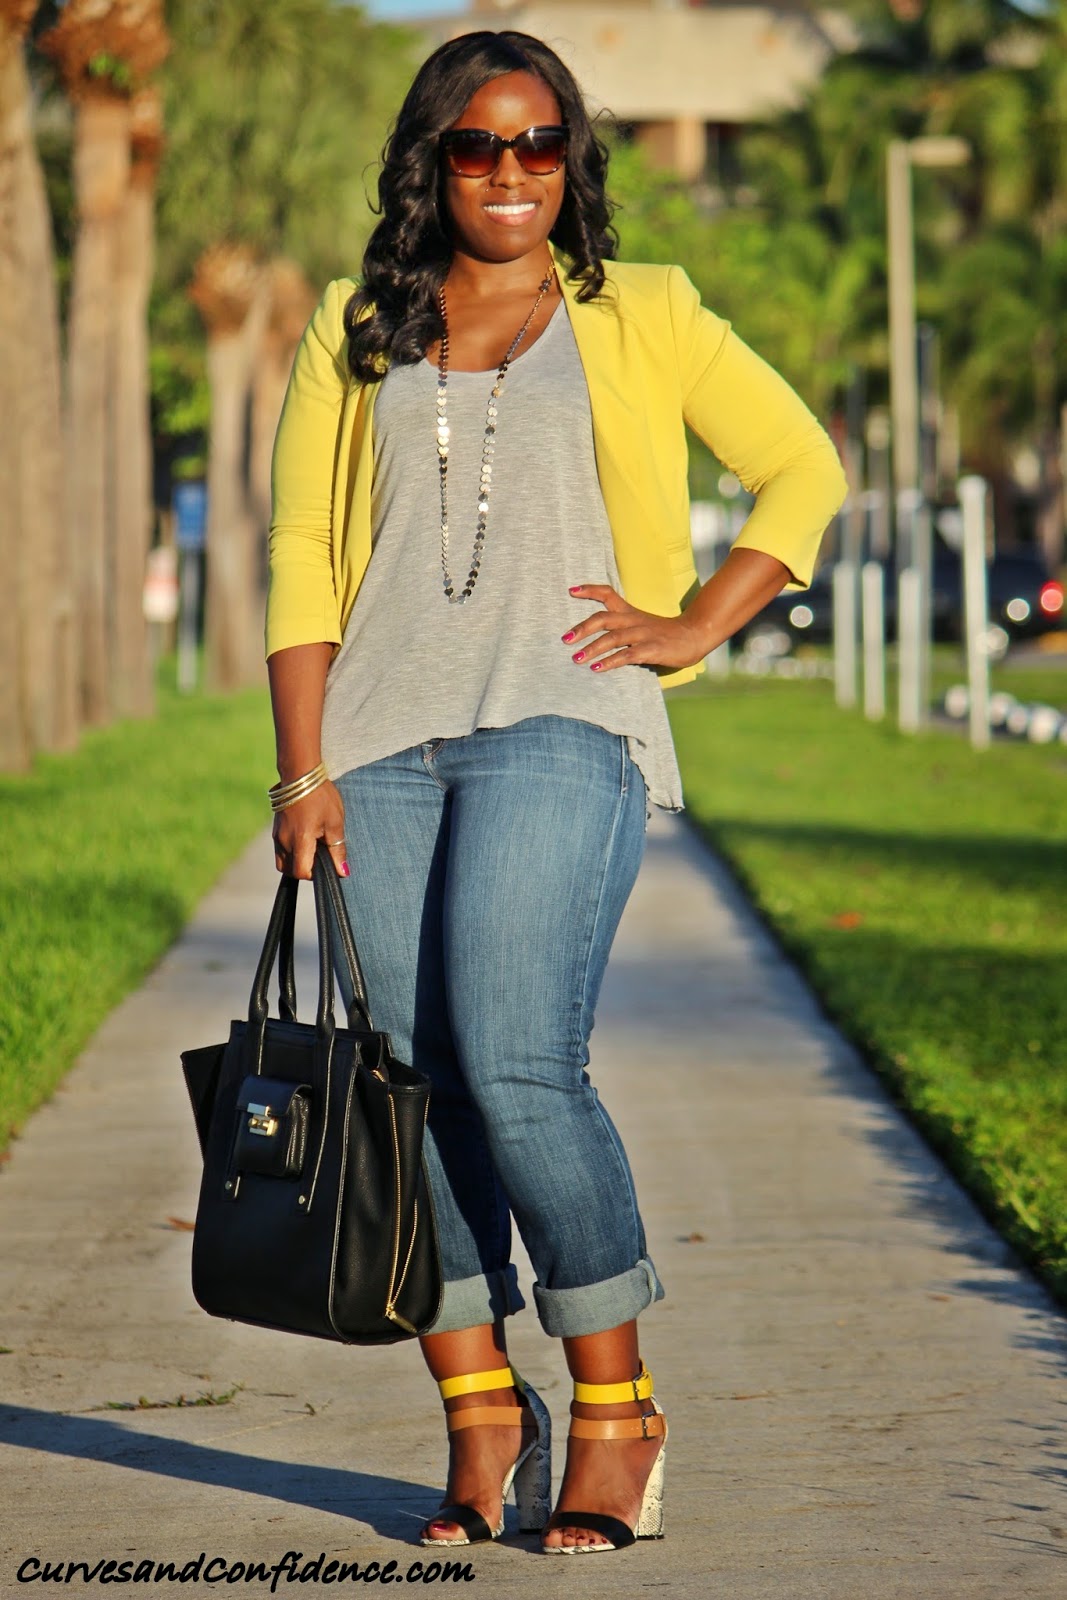 Weekend Wear: Gap Jeans - Curves and Confidence